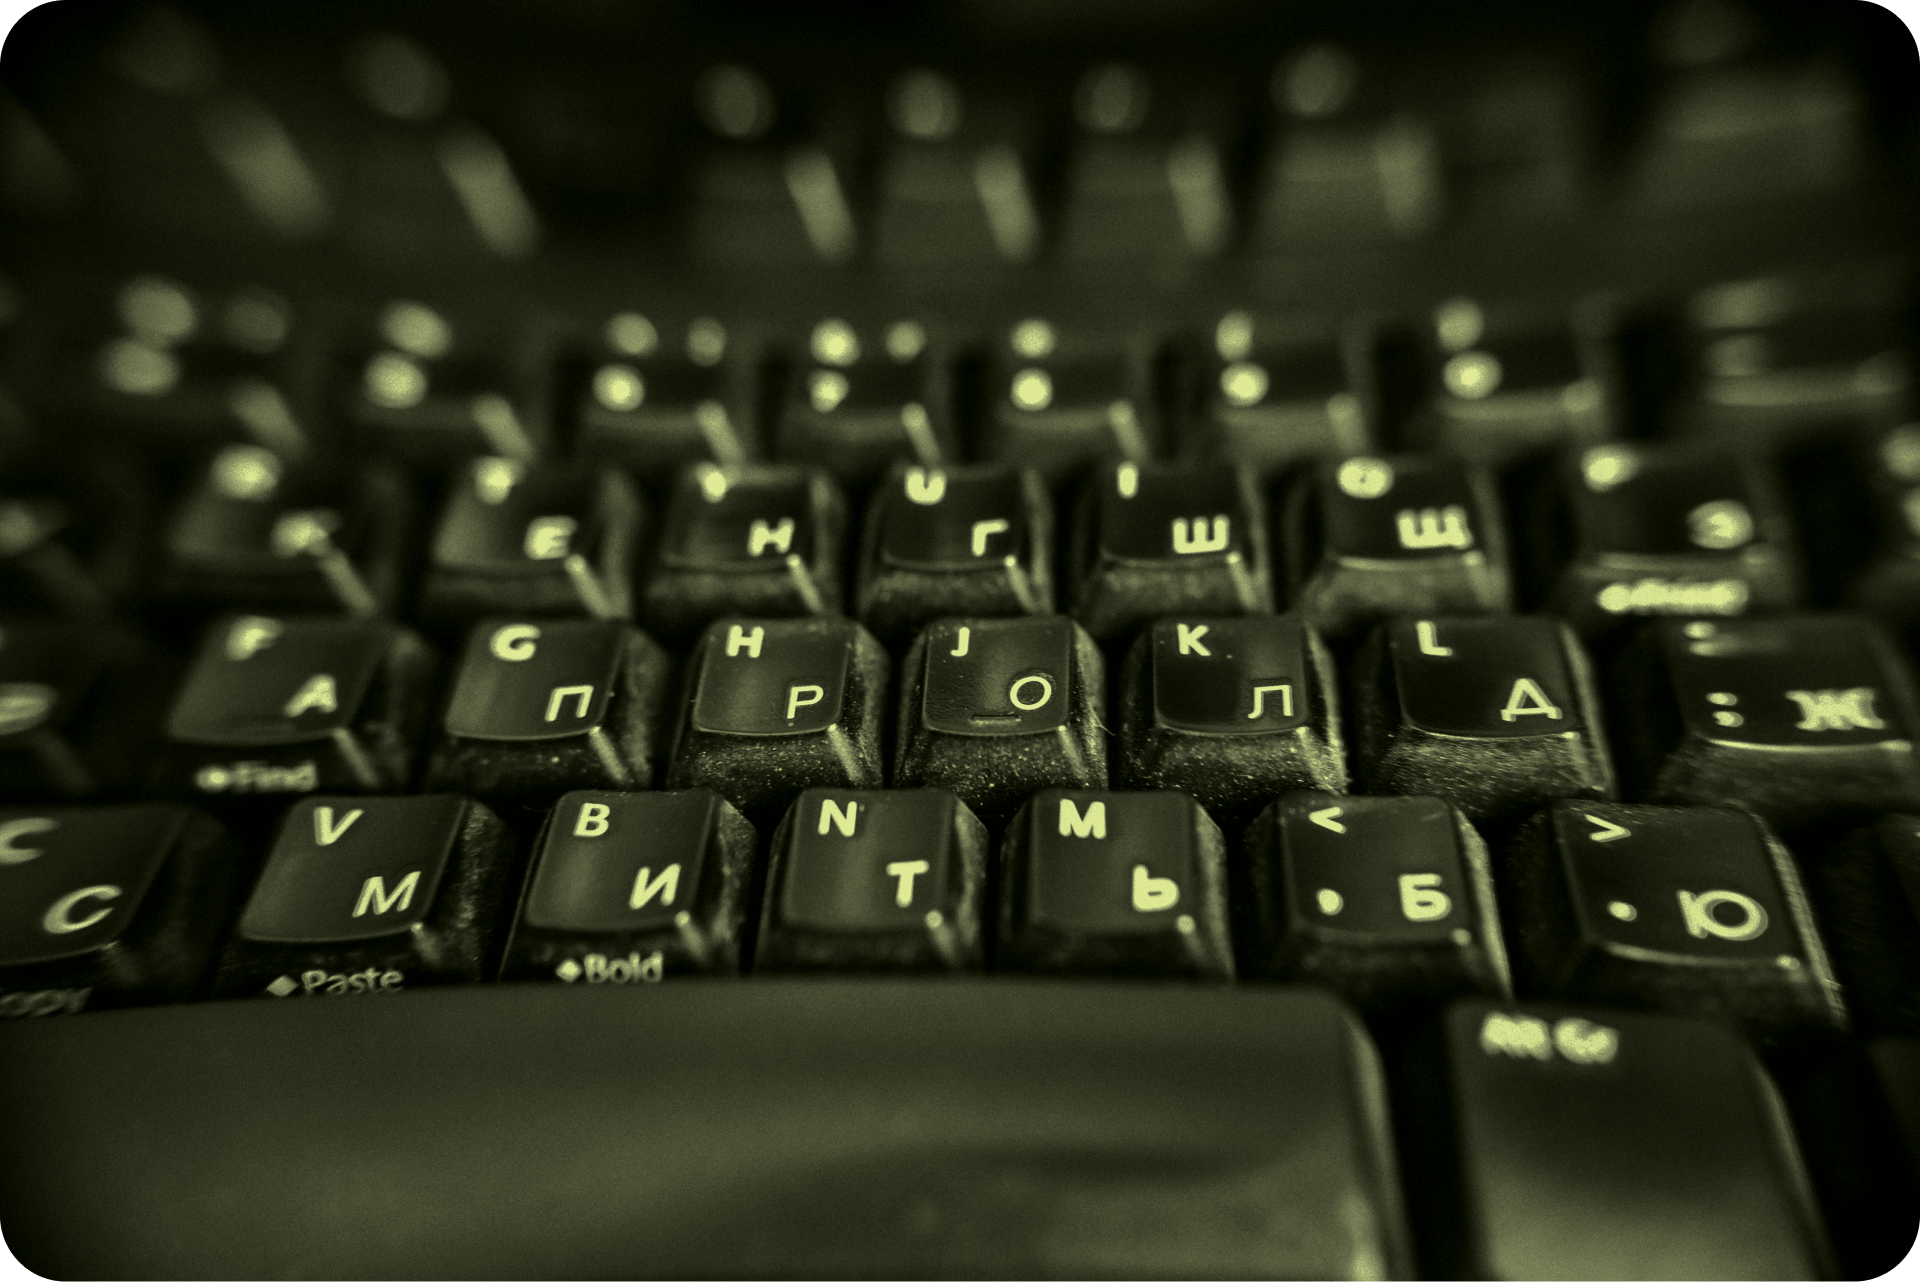 old-computer-keyboard-black-and-white-photography-2022-10-31-21-37-32-utc 1 (1) (1)